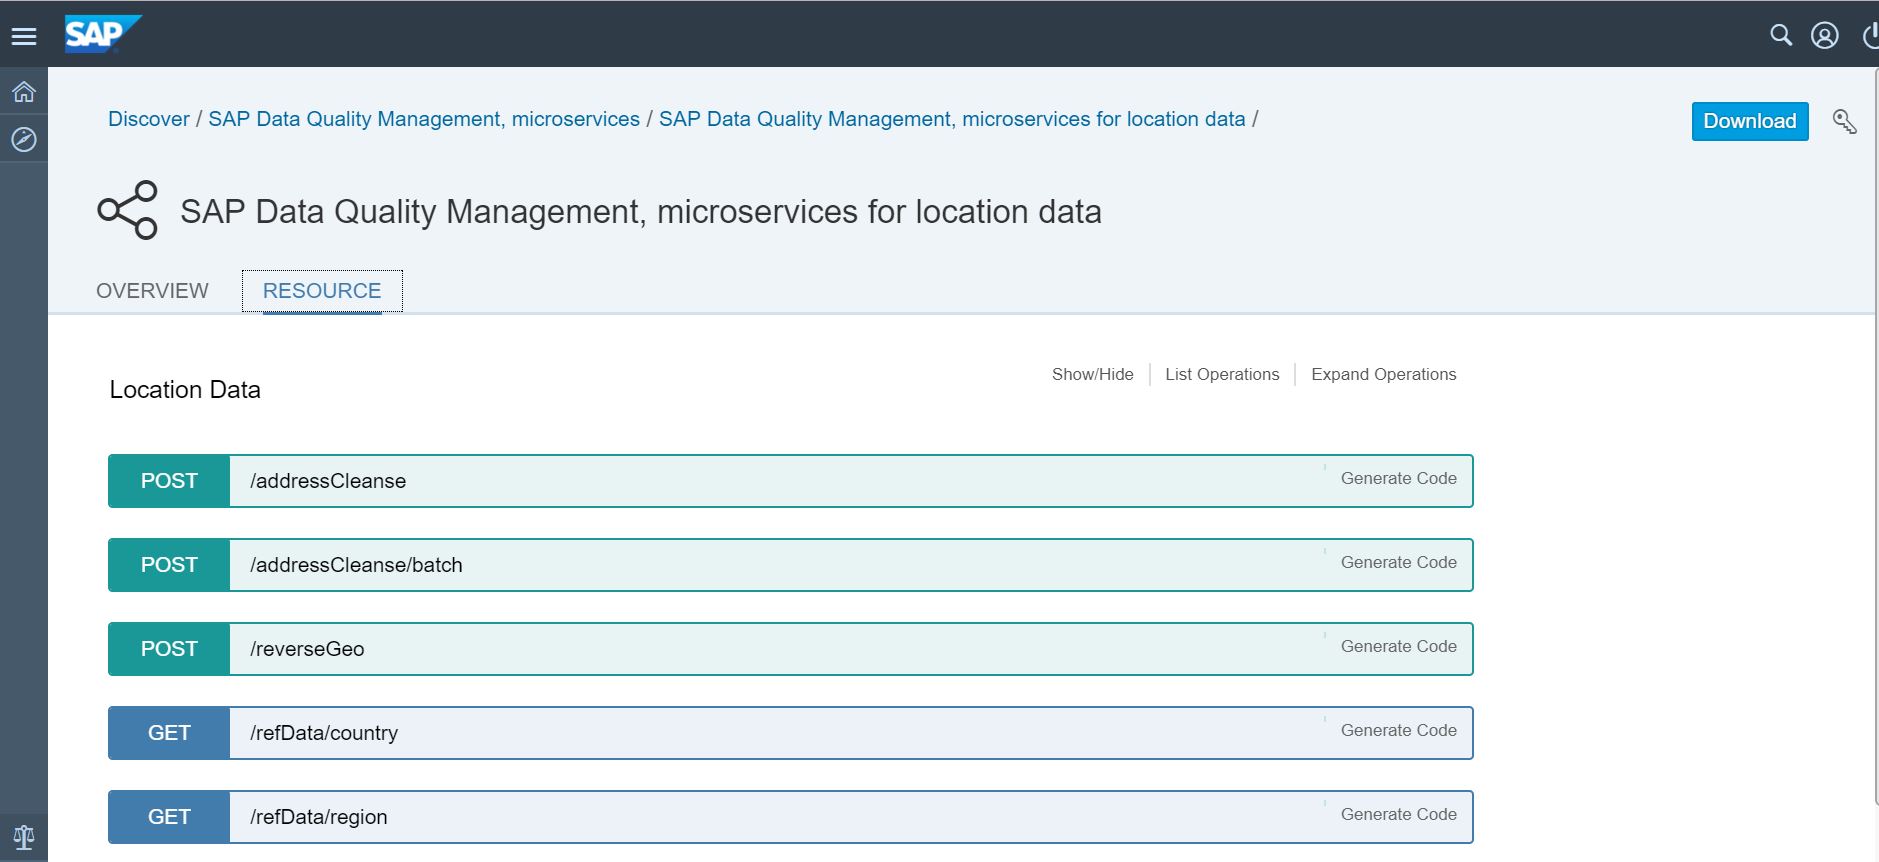 Picture of SAP Data Quality Management tools.